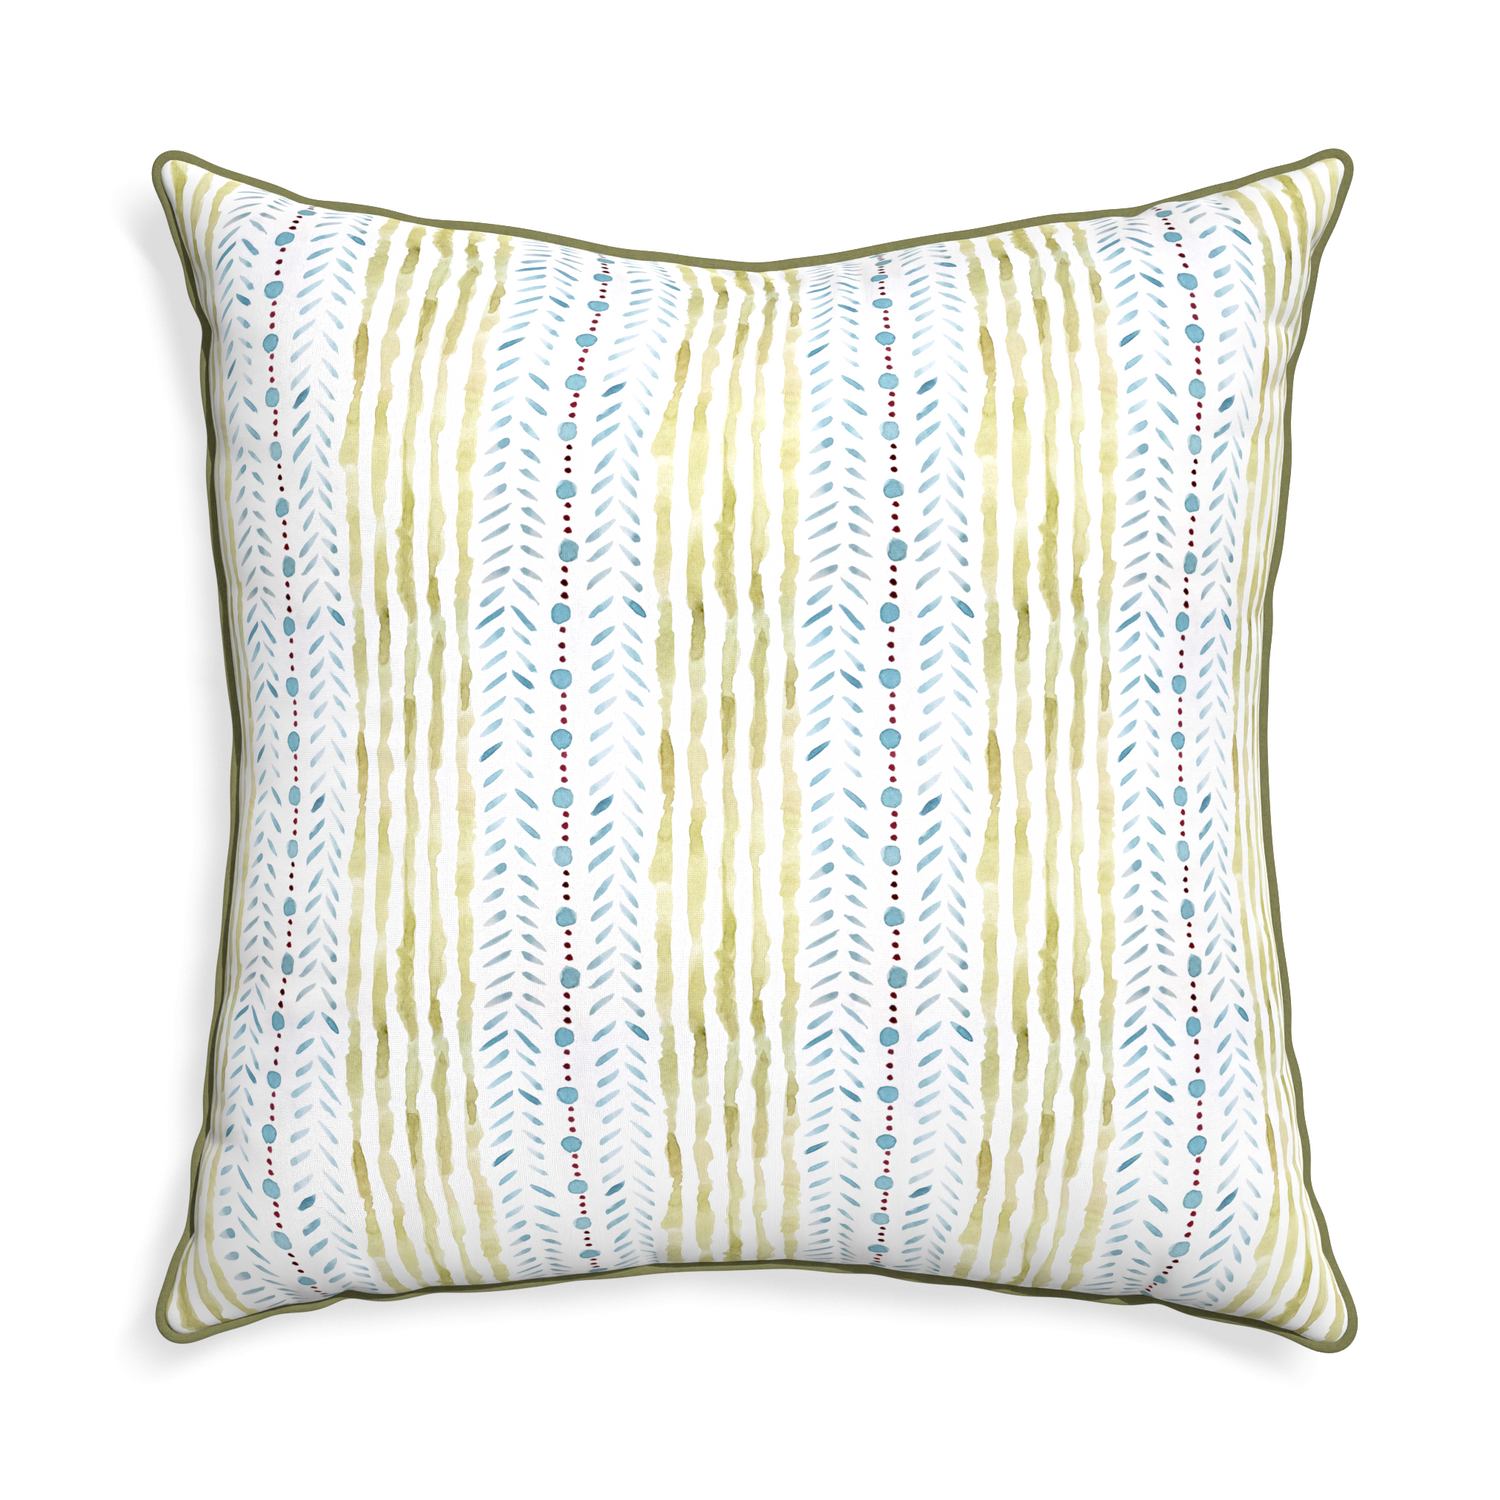 square blue and green striped pillow with moss green piping